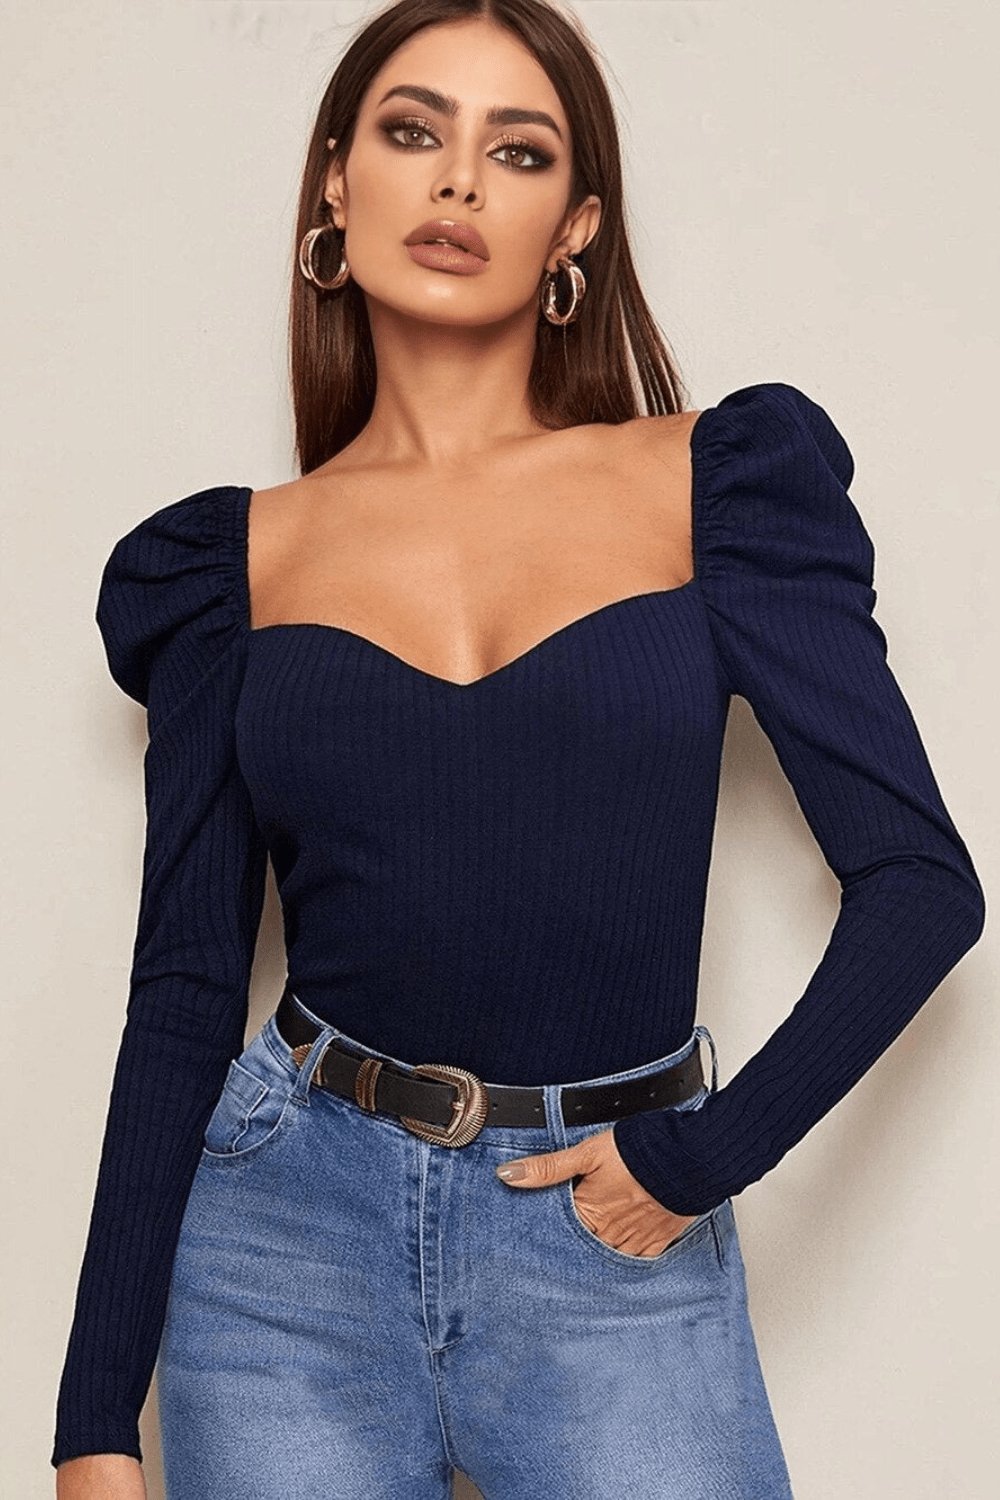 Bustier Fit Long Puff Sleeve Top - TGC Boutique - Top